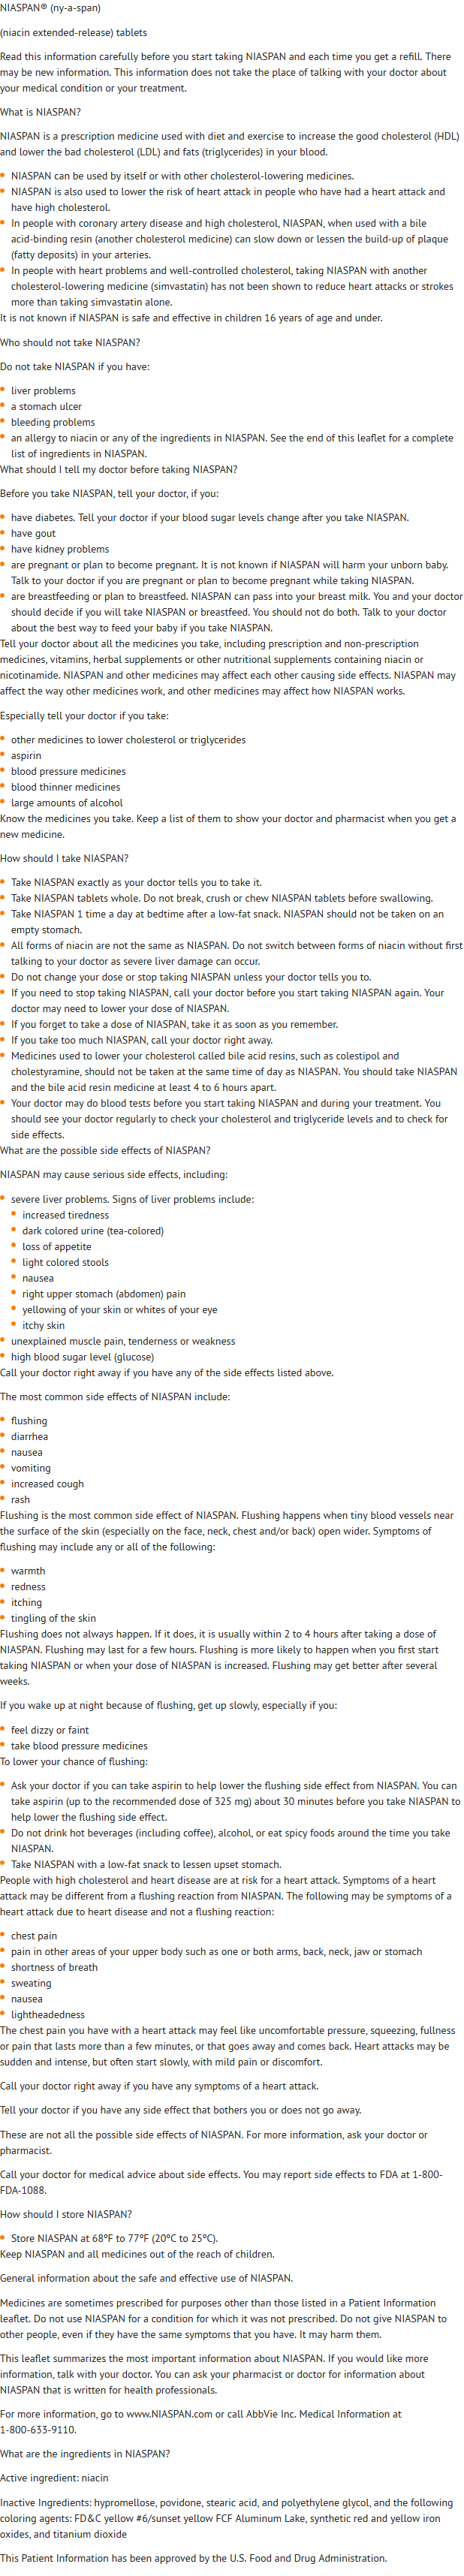 File:Niacin extended release16.png